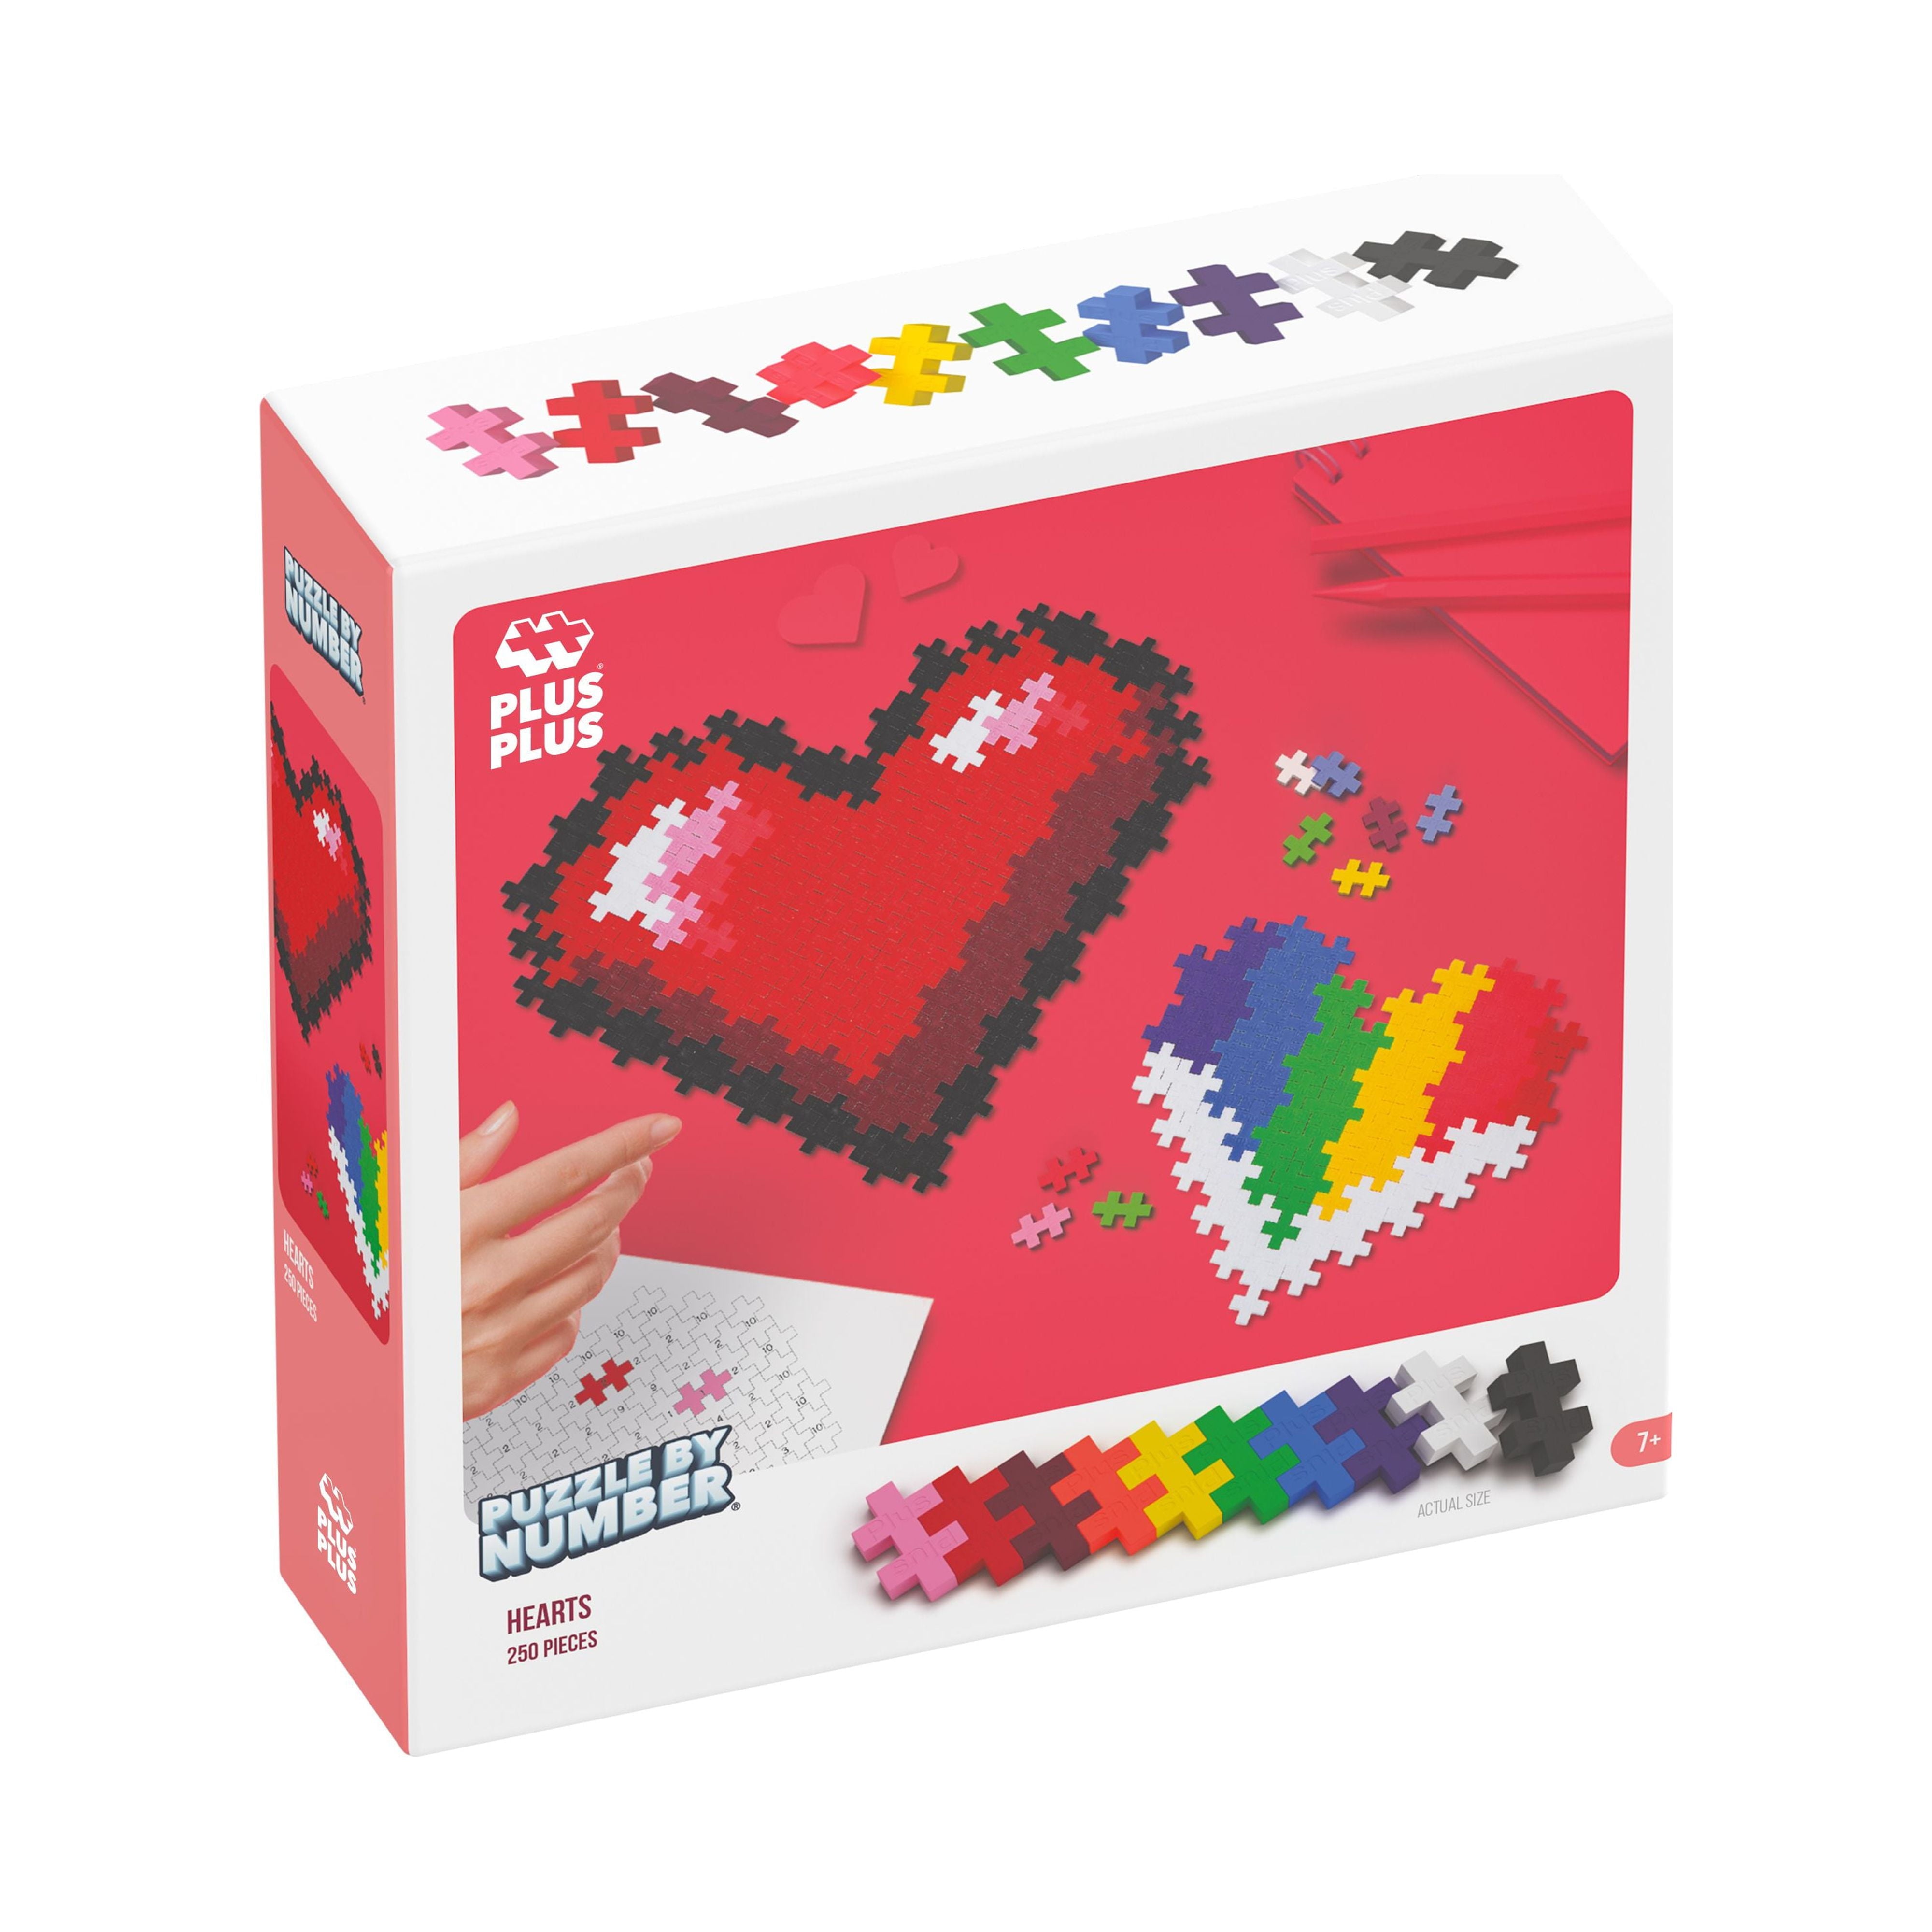 Puzzle by Number - Hearts